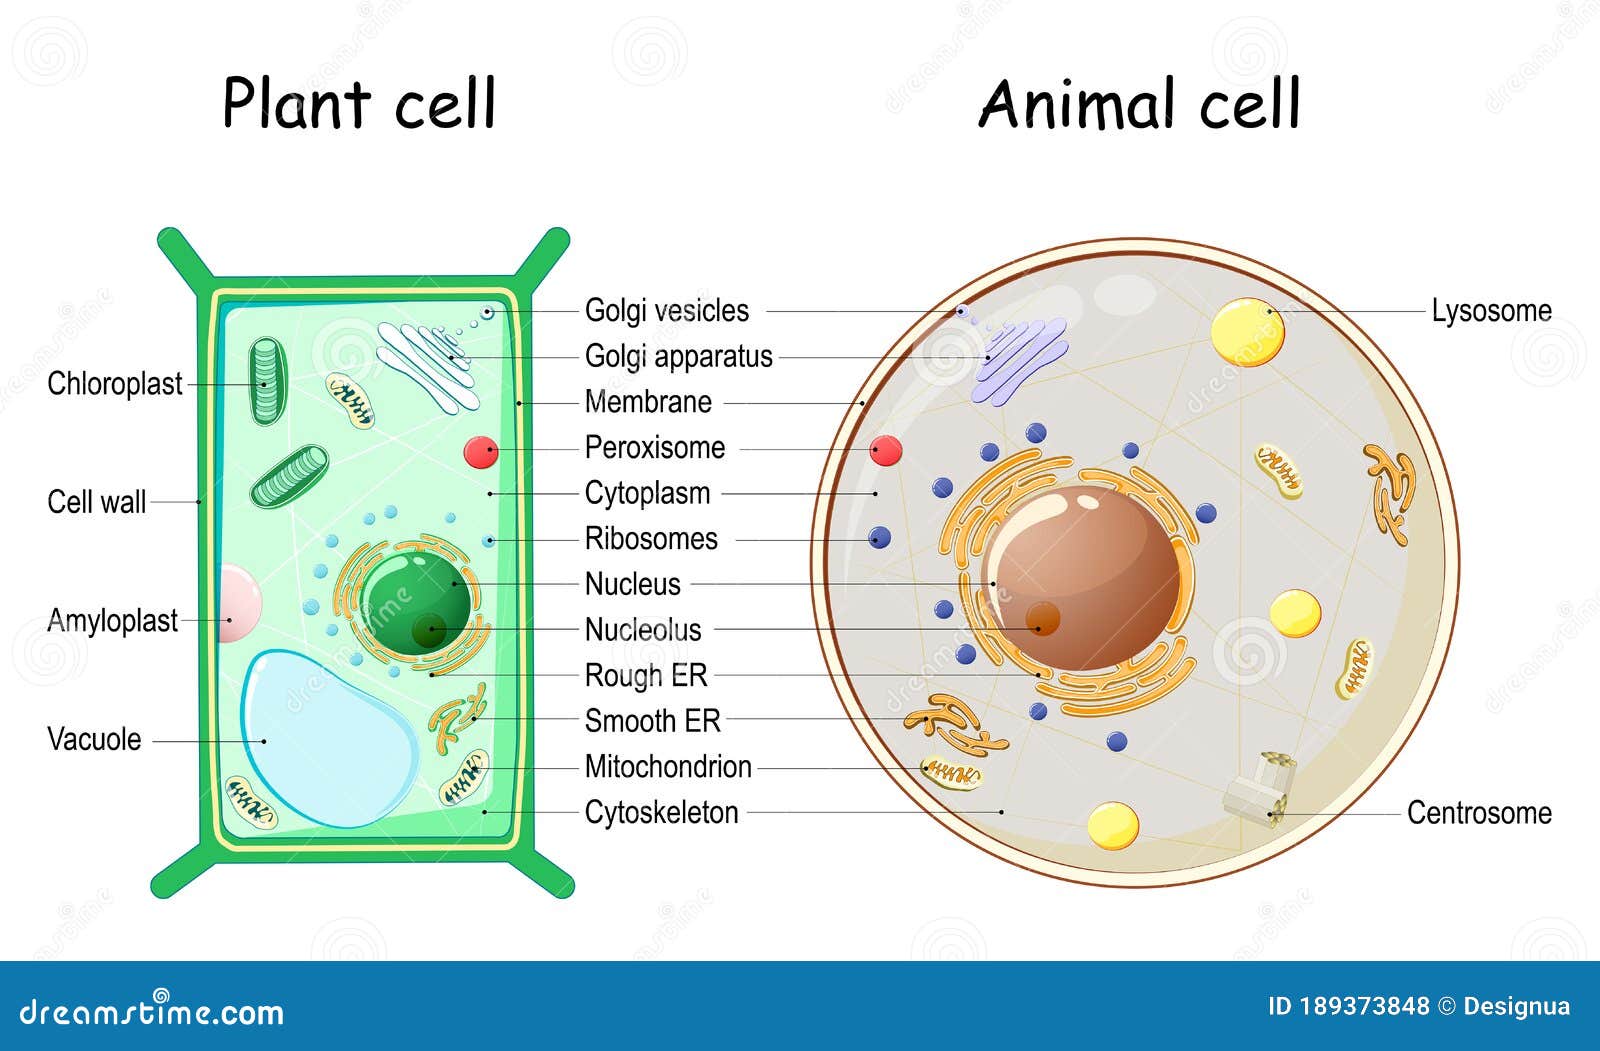 plant cell and animal cell structure